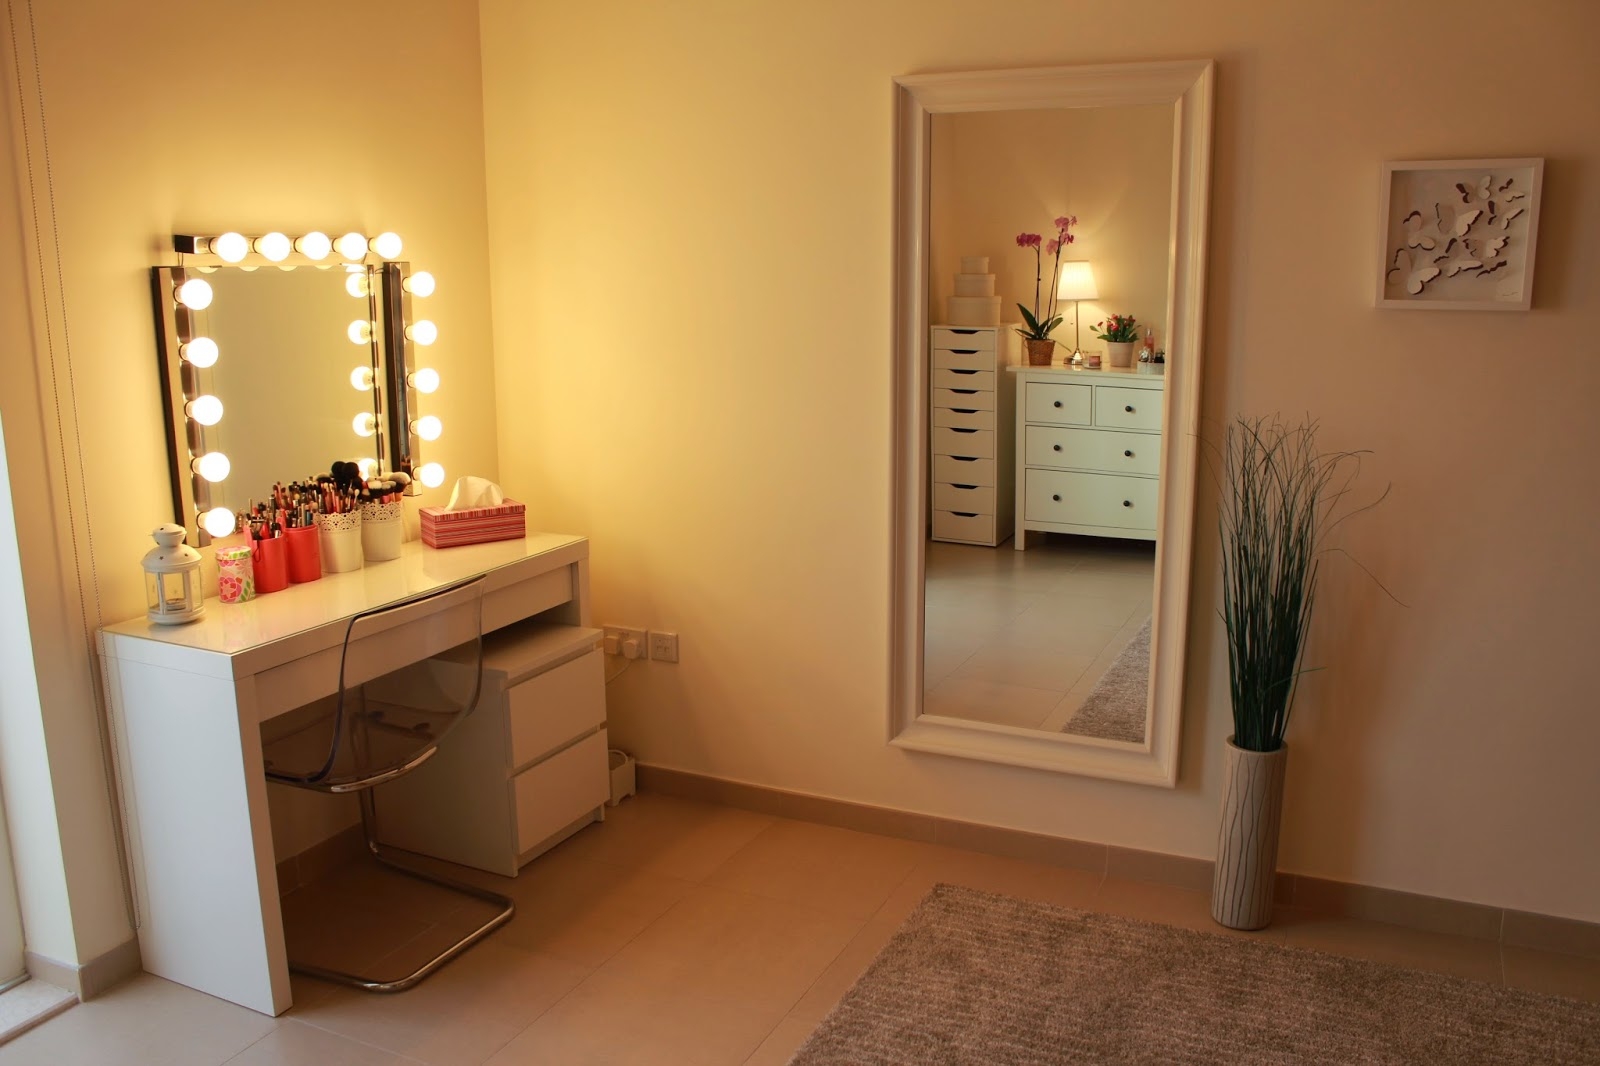 50 Vanity Mirror With Light Bulbs, Small White Vanity With Mirror